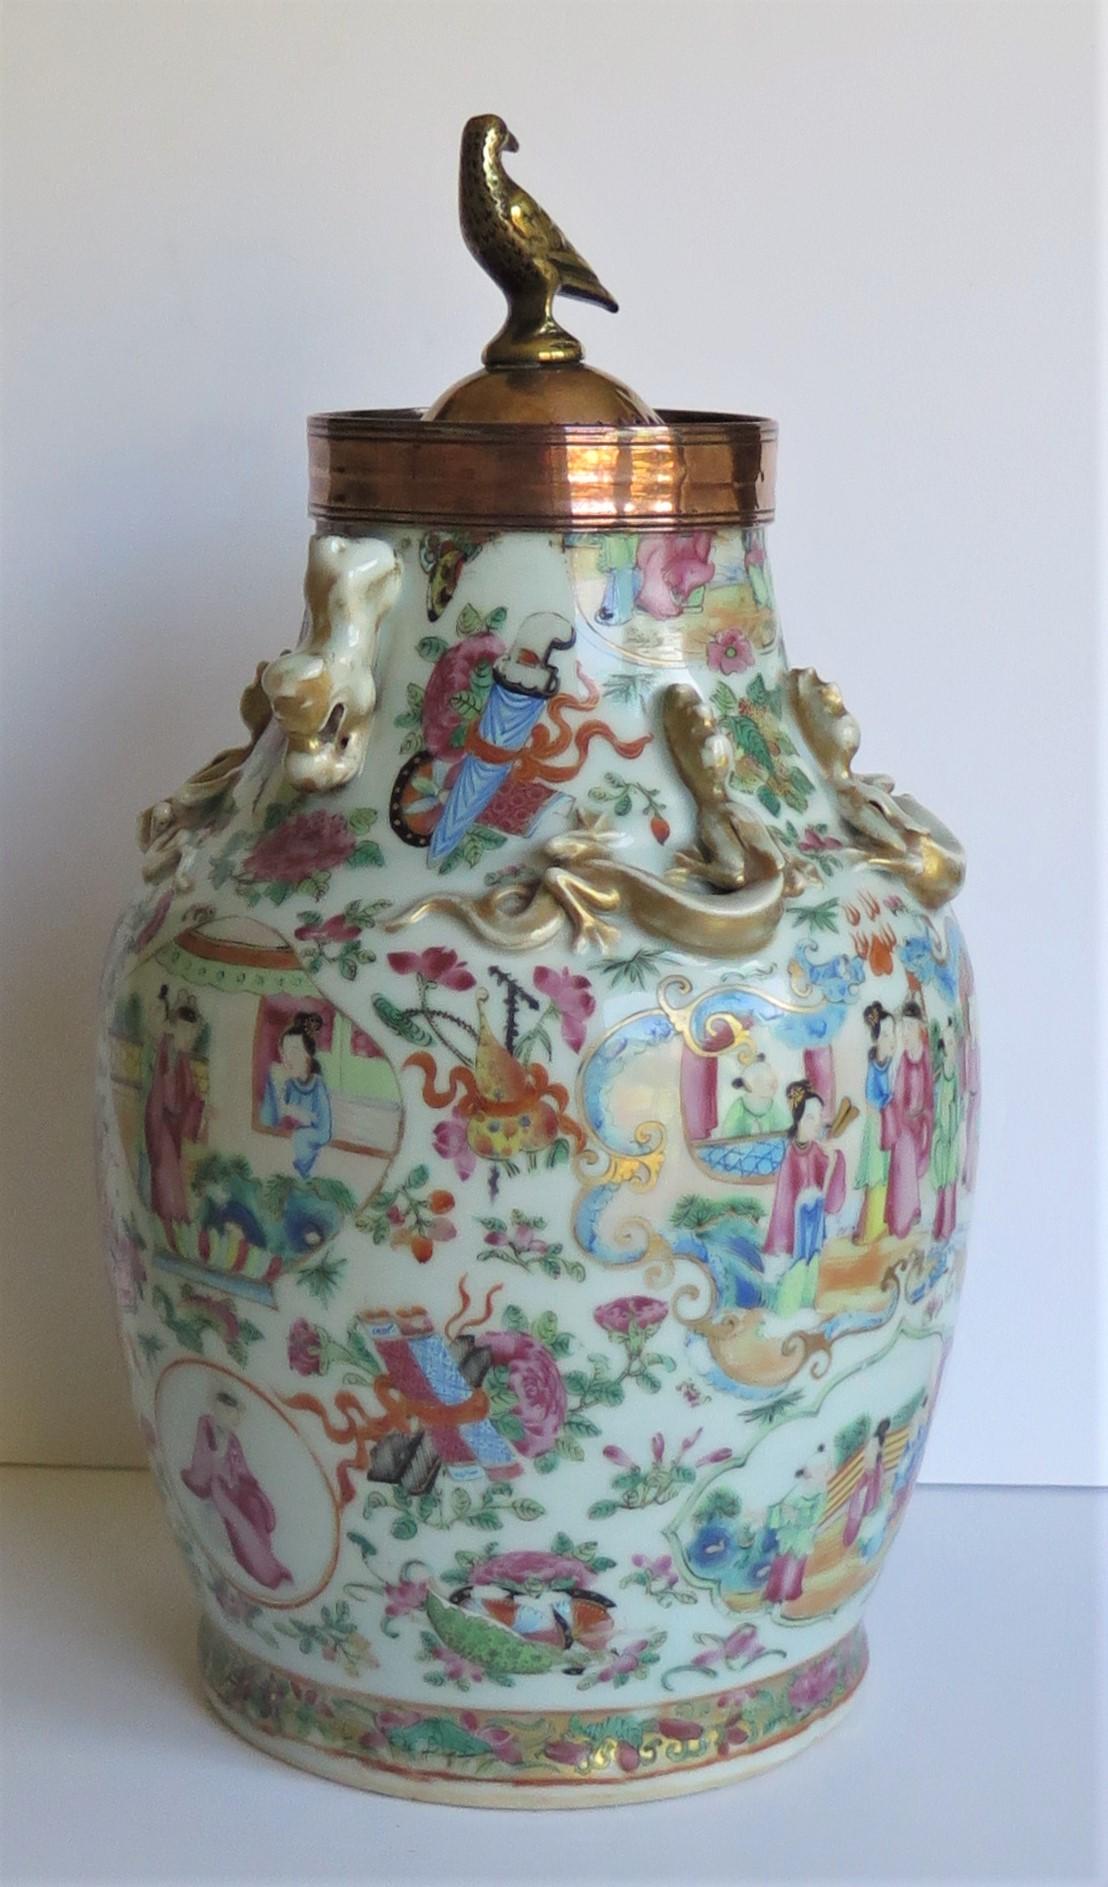 Hand-Painted Chinese Porcelain Canton Vase Reduced to Make Potpourri Urn with Bird Top, Qing